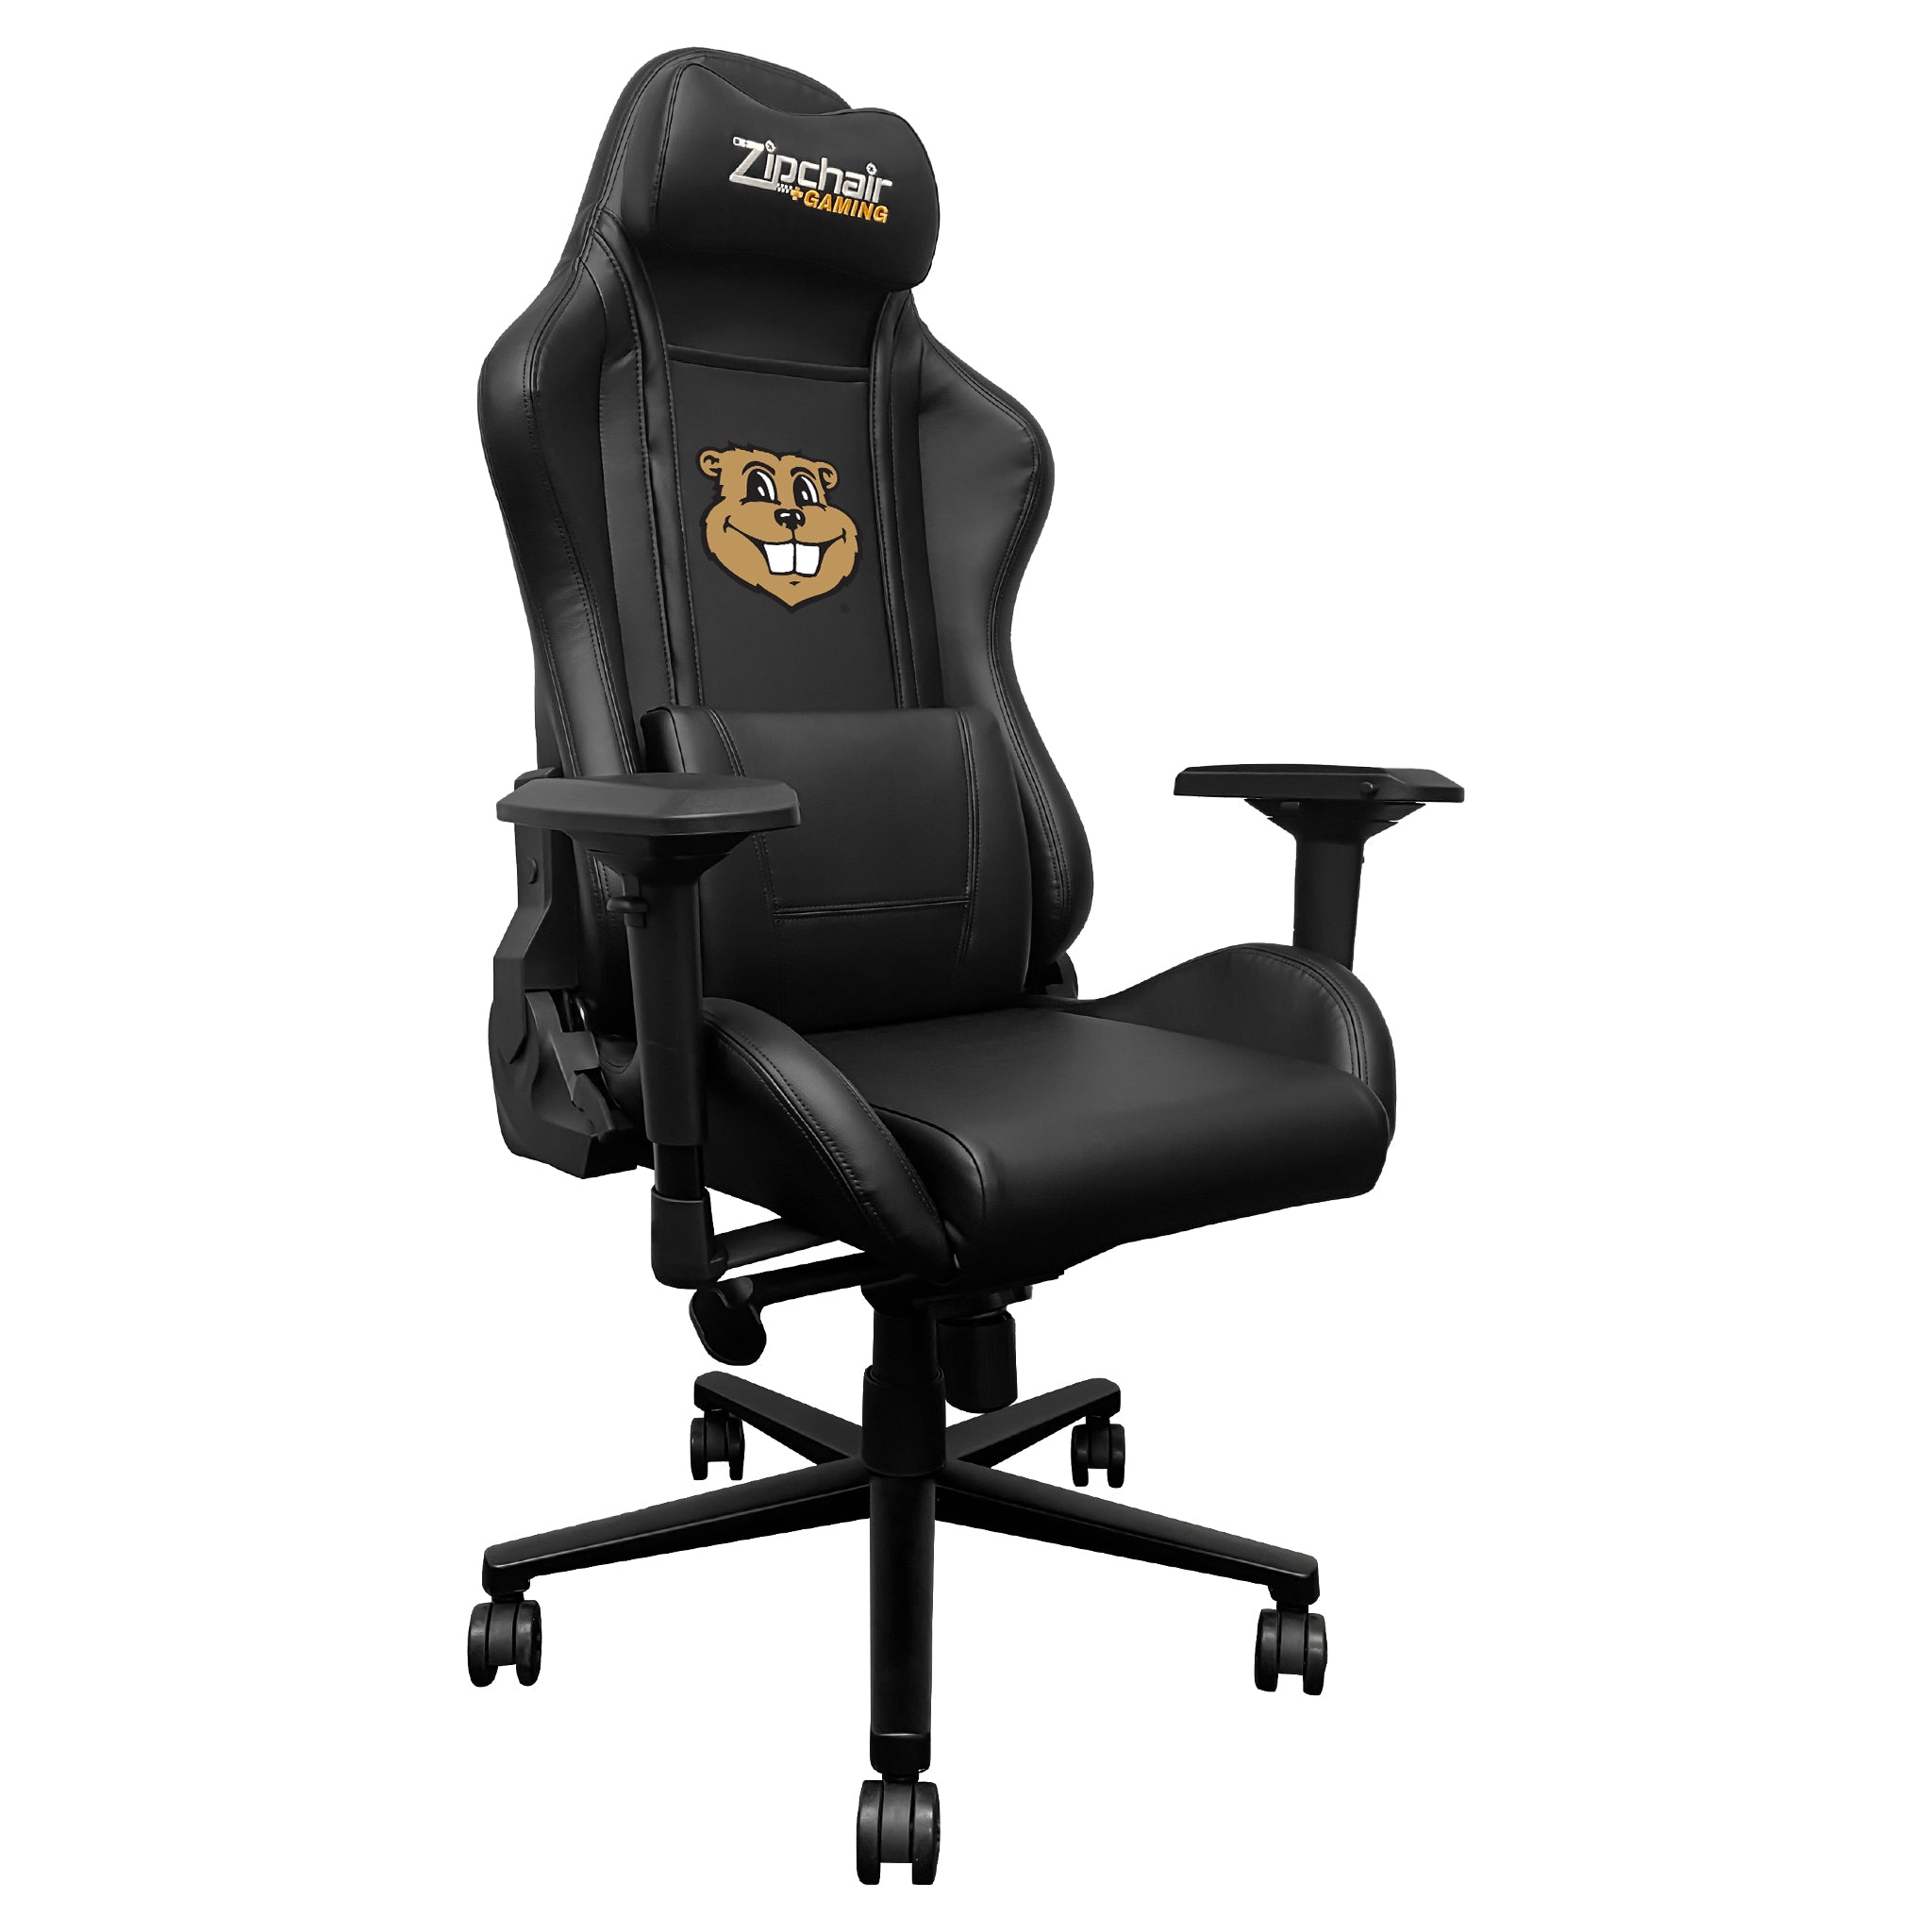 University of Minnesota Xpression Gaming Chair with University of Minnesota Alternate Logo